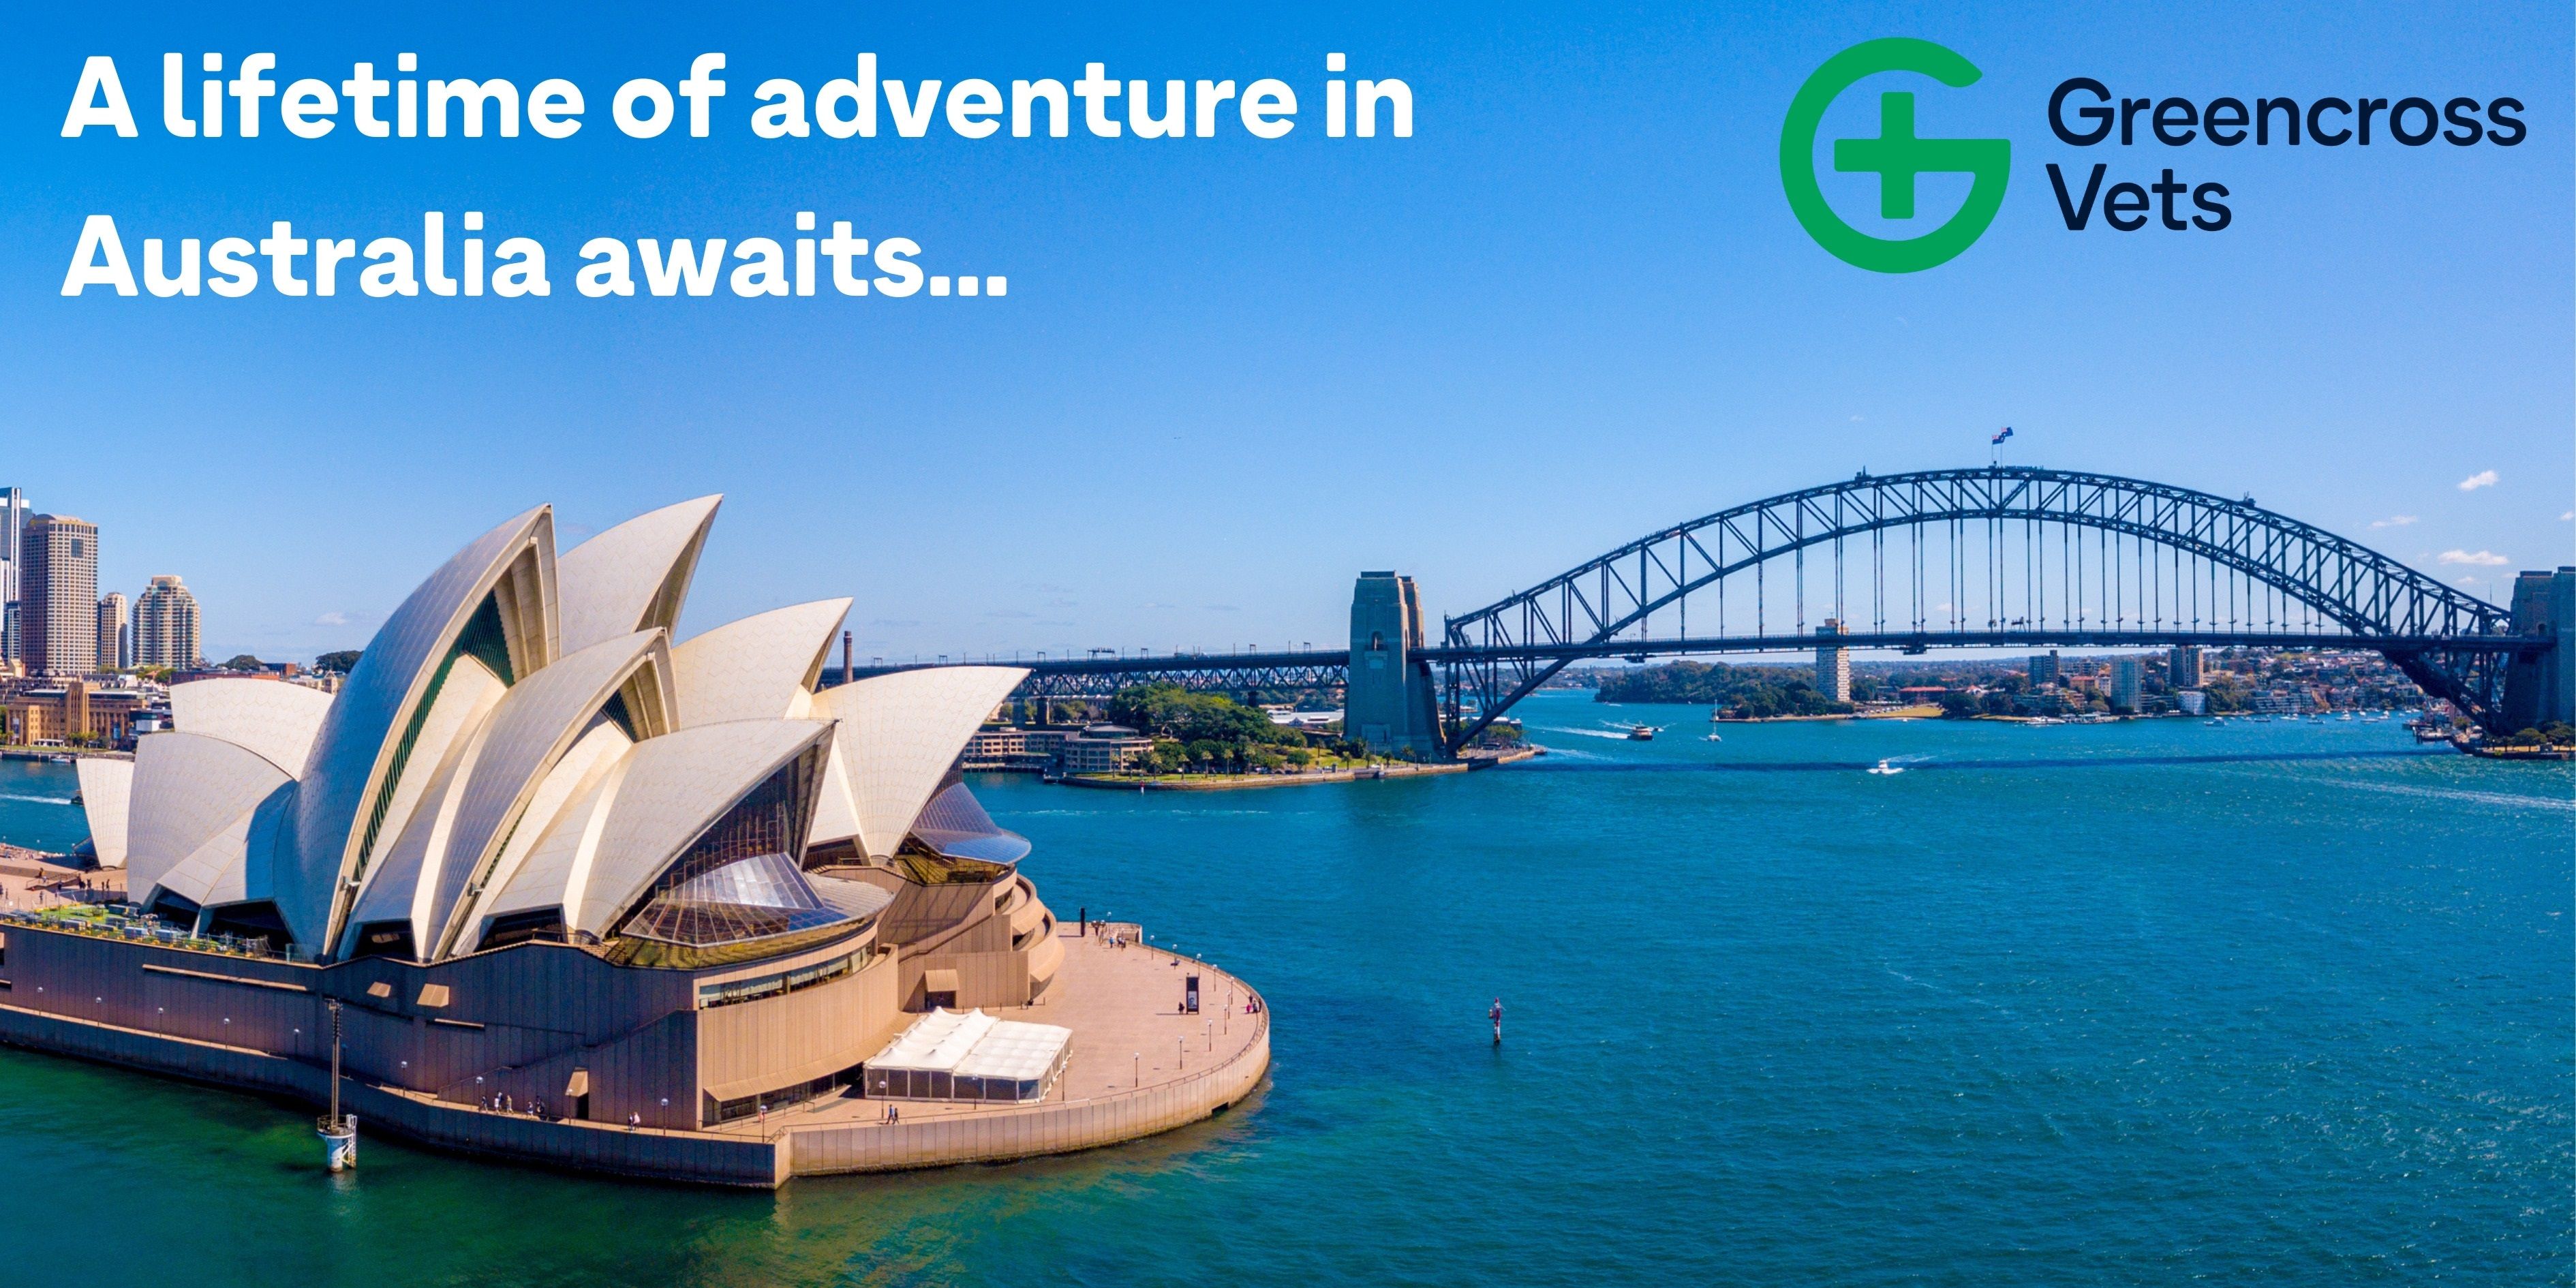 A career with Greencross Vets could take you anywhere…